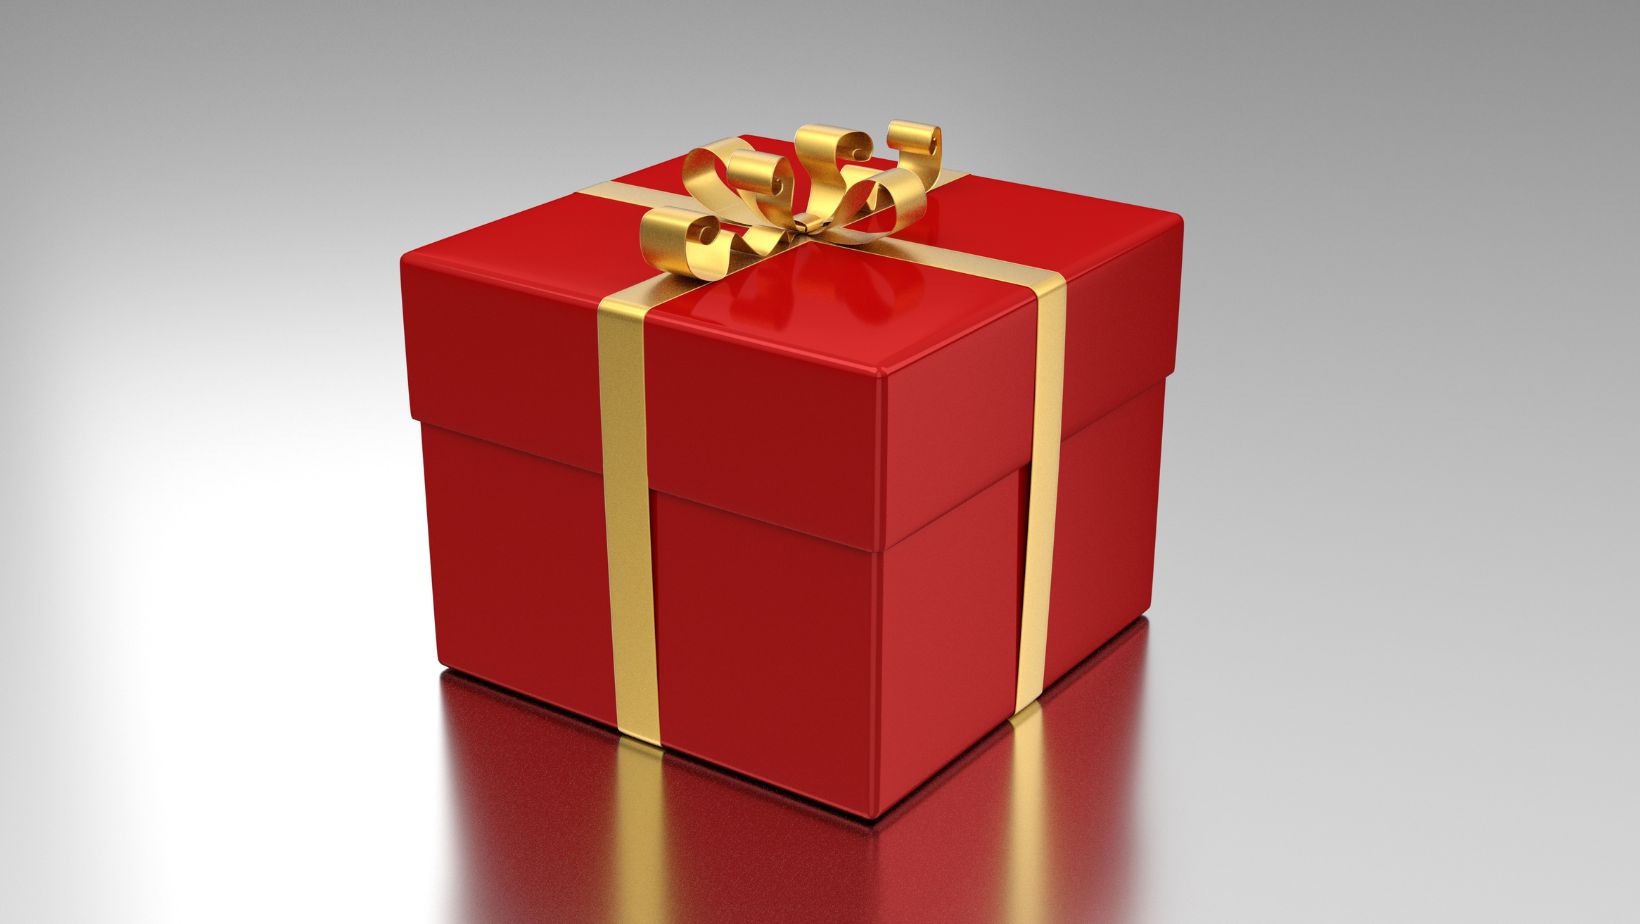 Don’t Let Your Corporate Gift End up in the Trash Bin